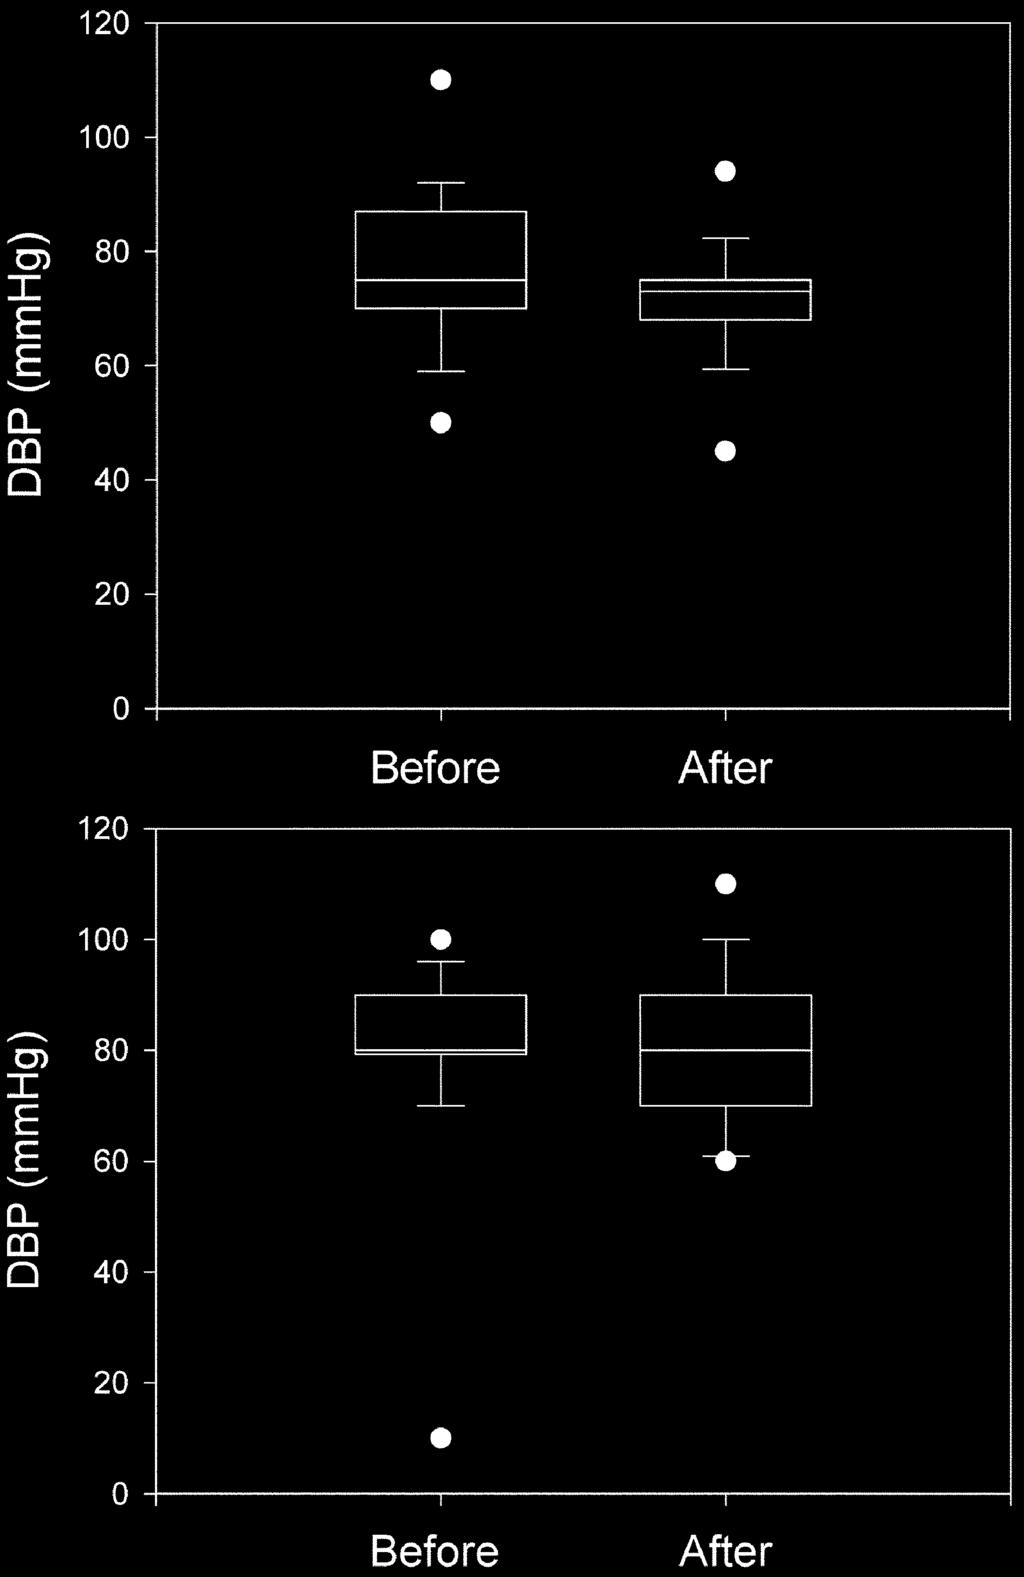 w y w beta-blocker z sƒ 119 Fig. 12. Diastolic blood pressure (DBP) before and after the one year treatment in non diabetic patients who has not been taking β-blocker.